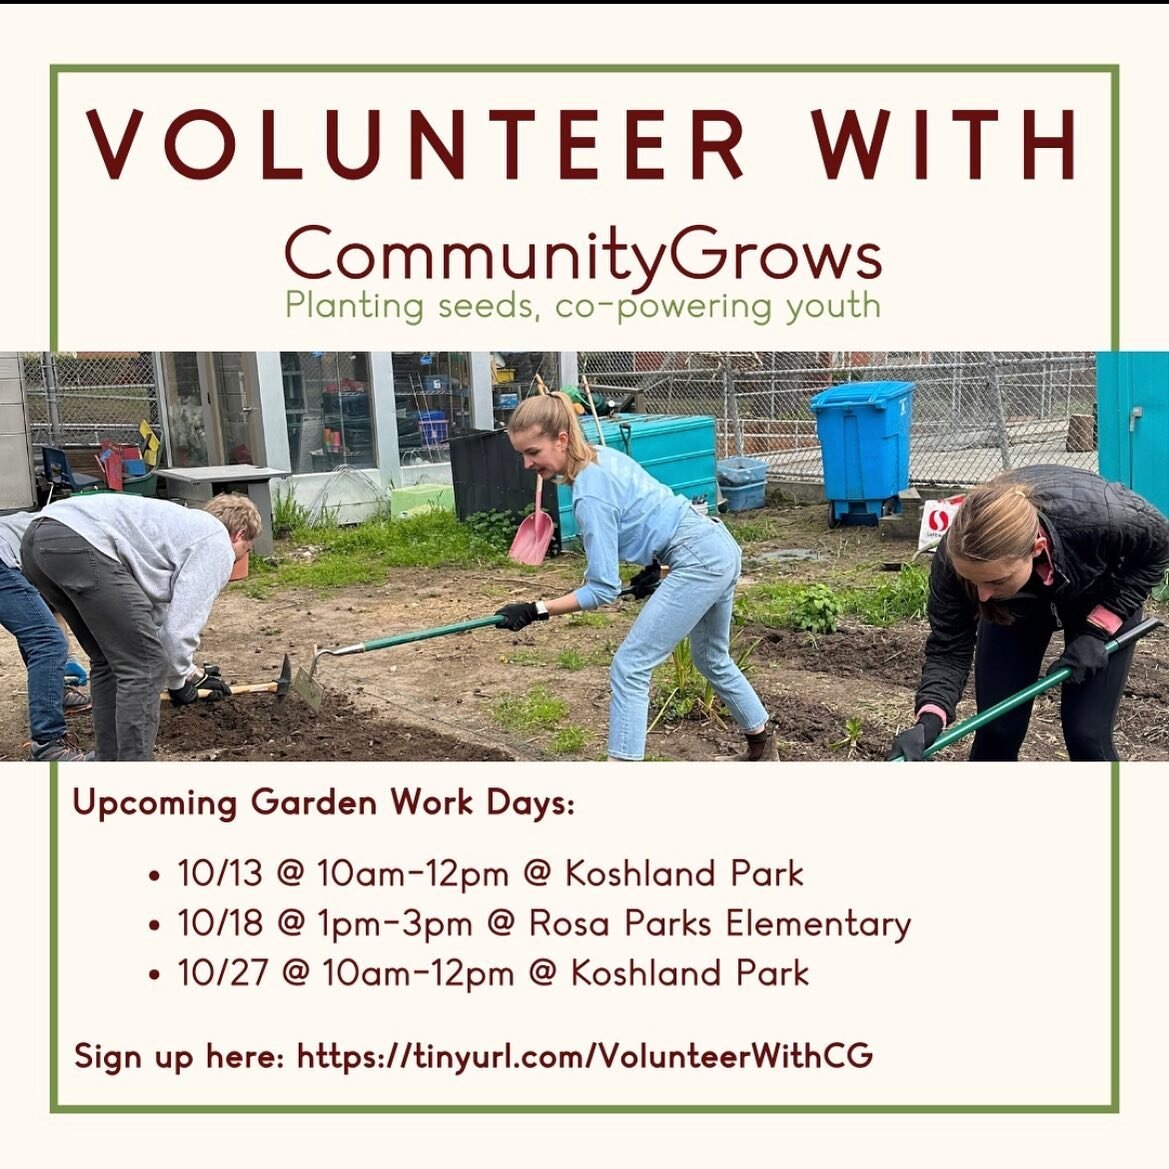 Please support Rosa Parks Elementary School&rsquo;s @communitygrows garden program during our upcoming volunteer day on 10/18! 🥕 🍅 🌱